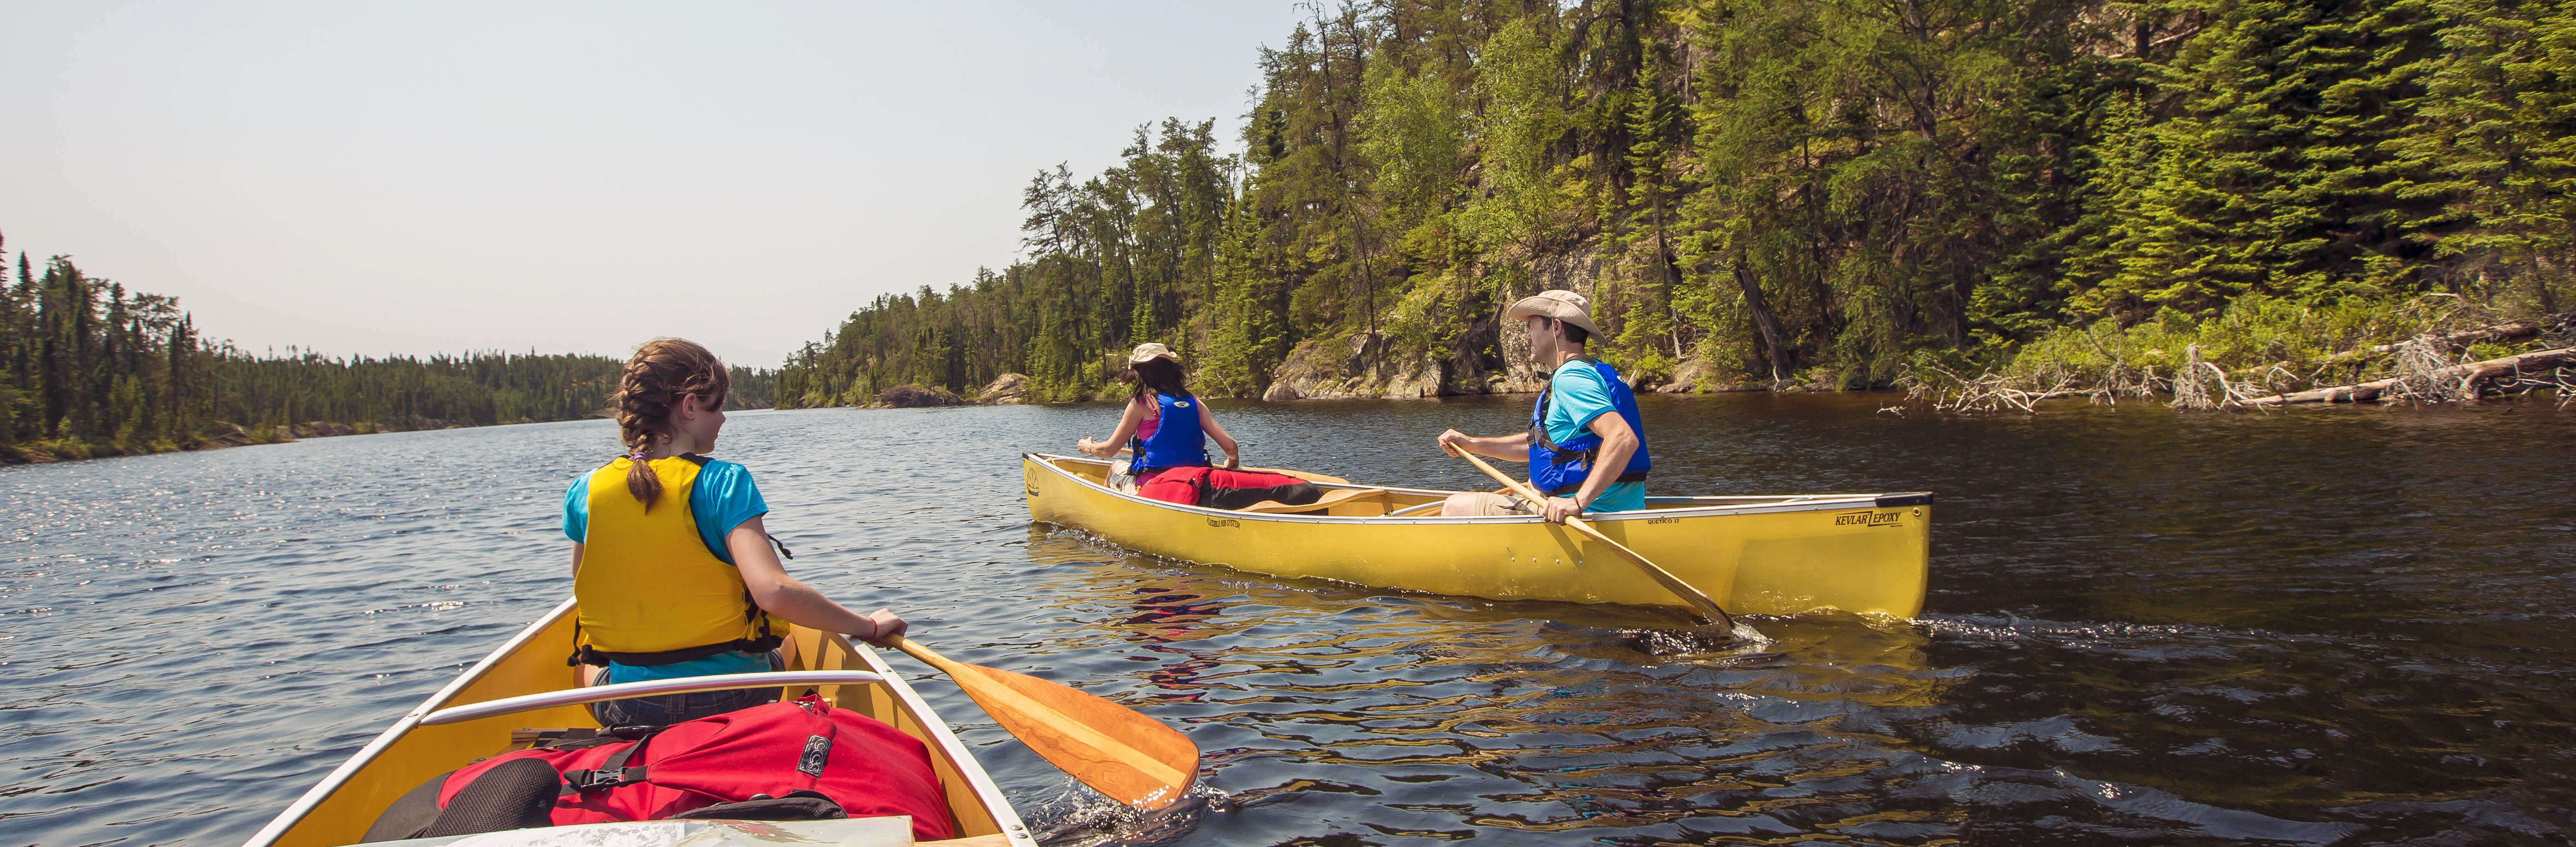 Paddlers are the number one visitors to the backcountry